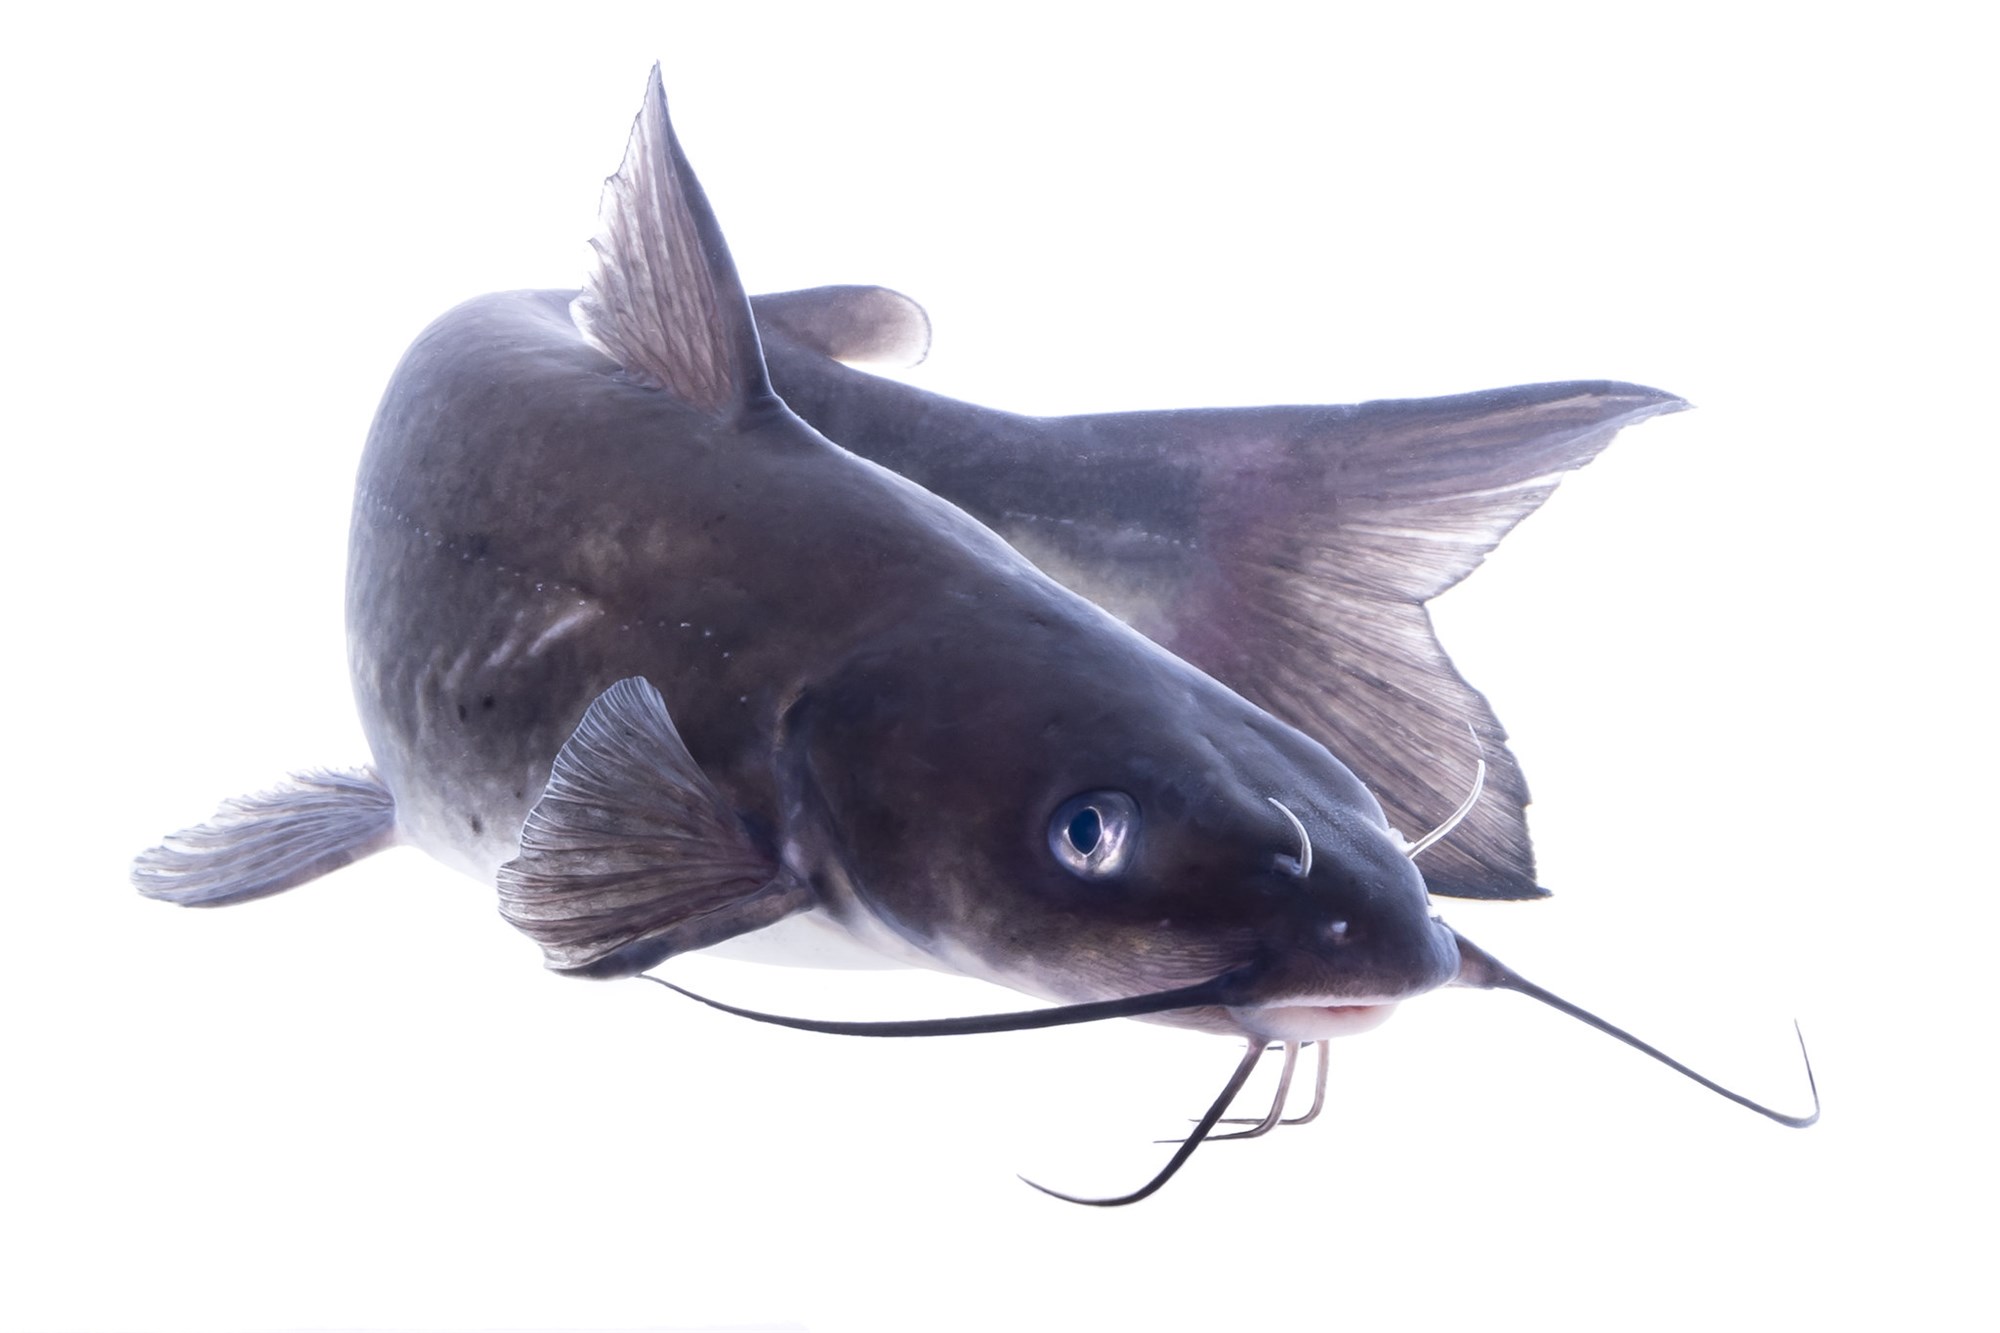 Accelerometers Provide Insight Into Energy Budgets of Channel Catfish